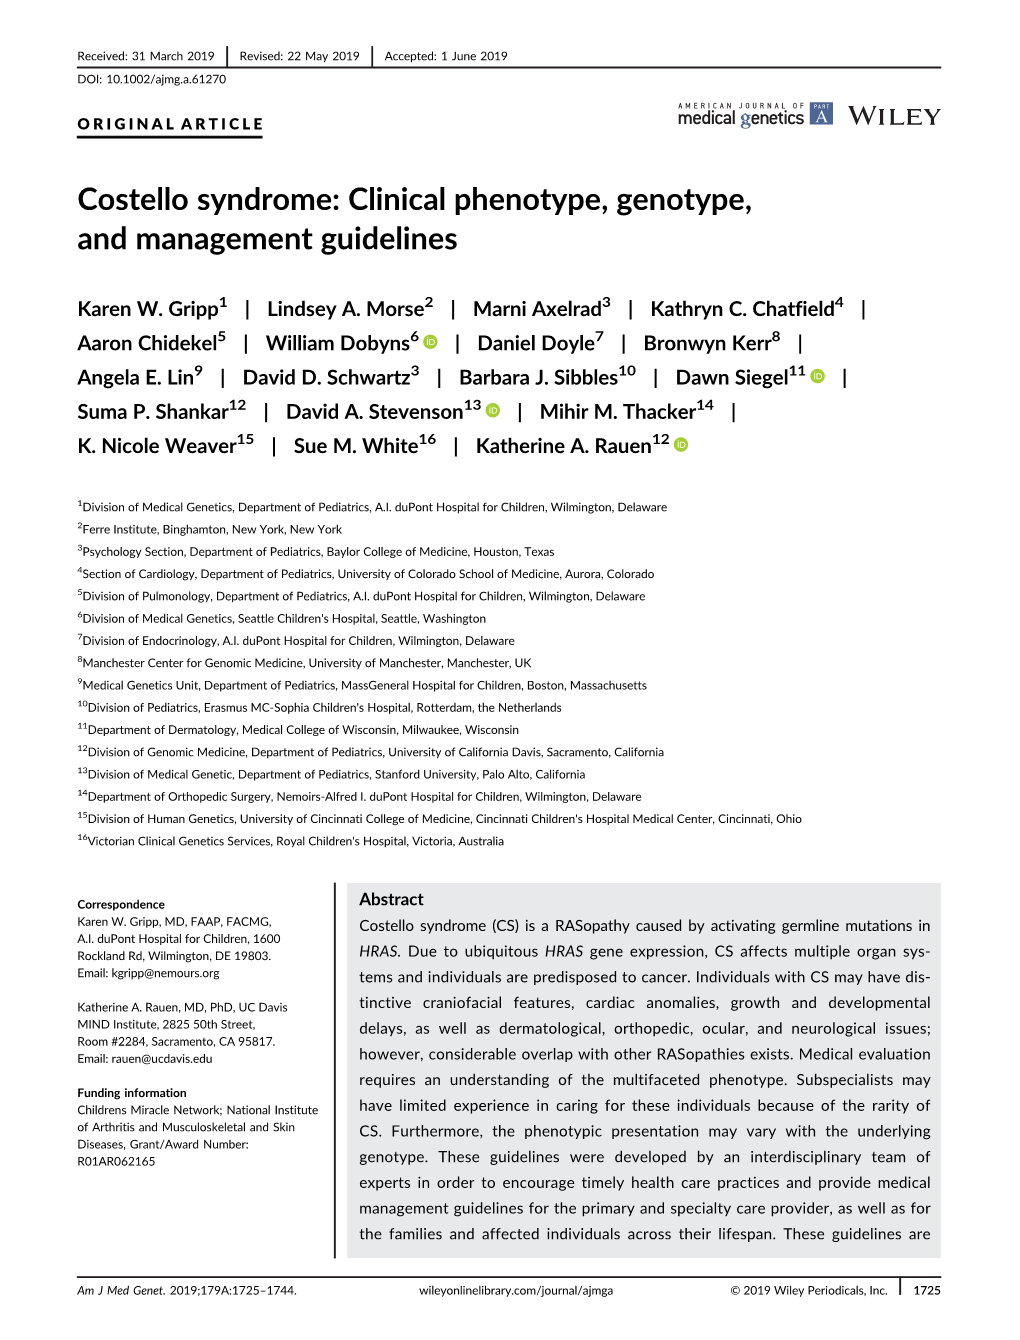 Costello Syndrome: Clinical Phenotype, Genotype, and Management Guidelines